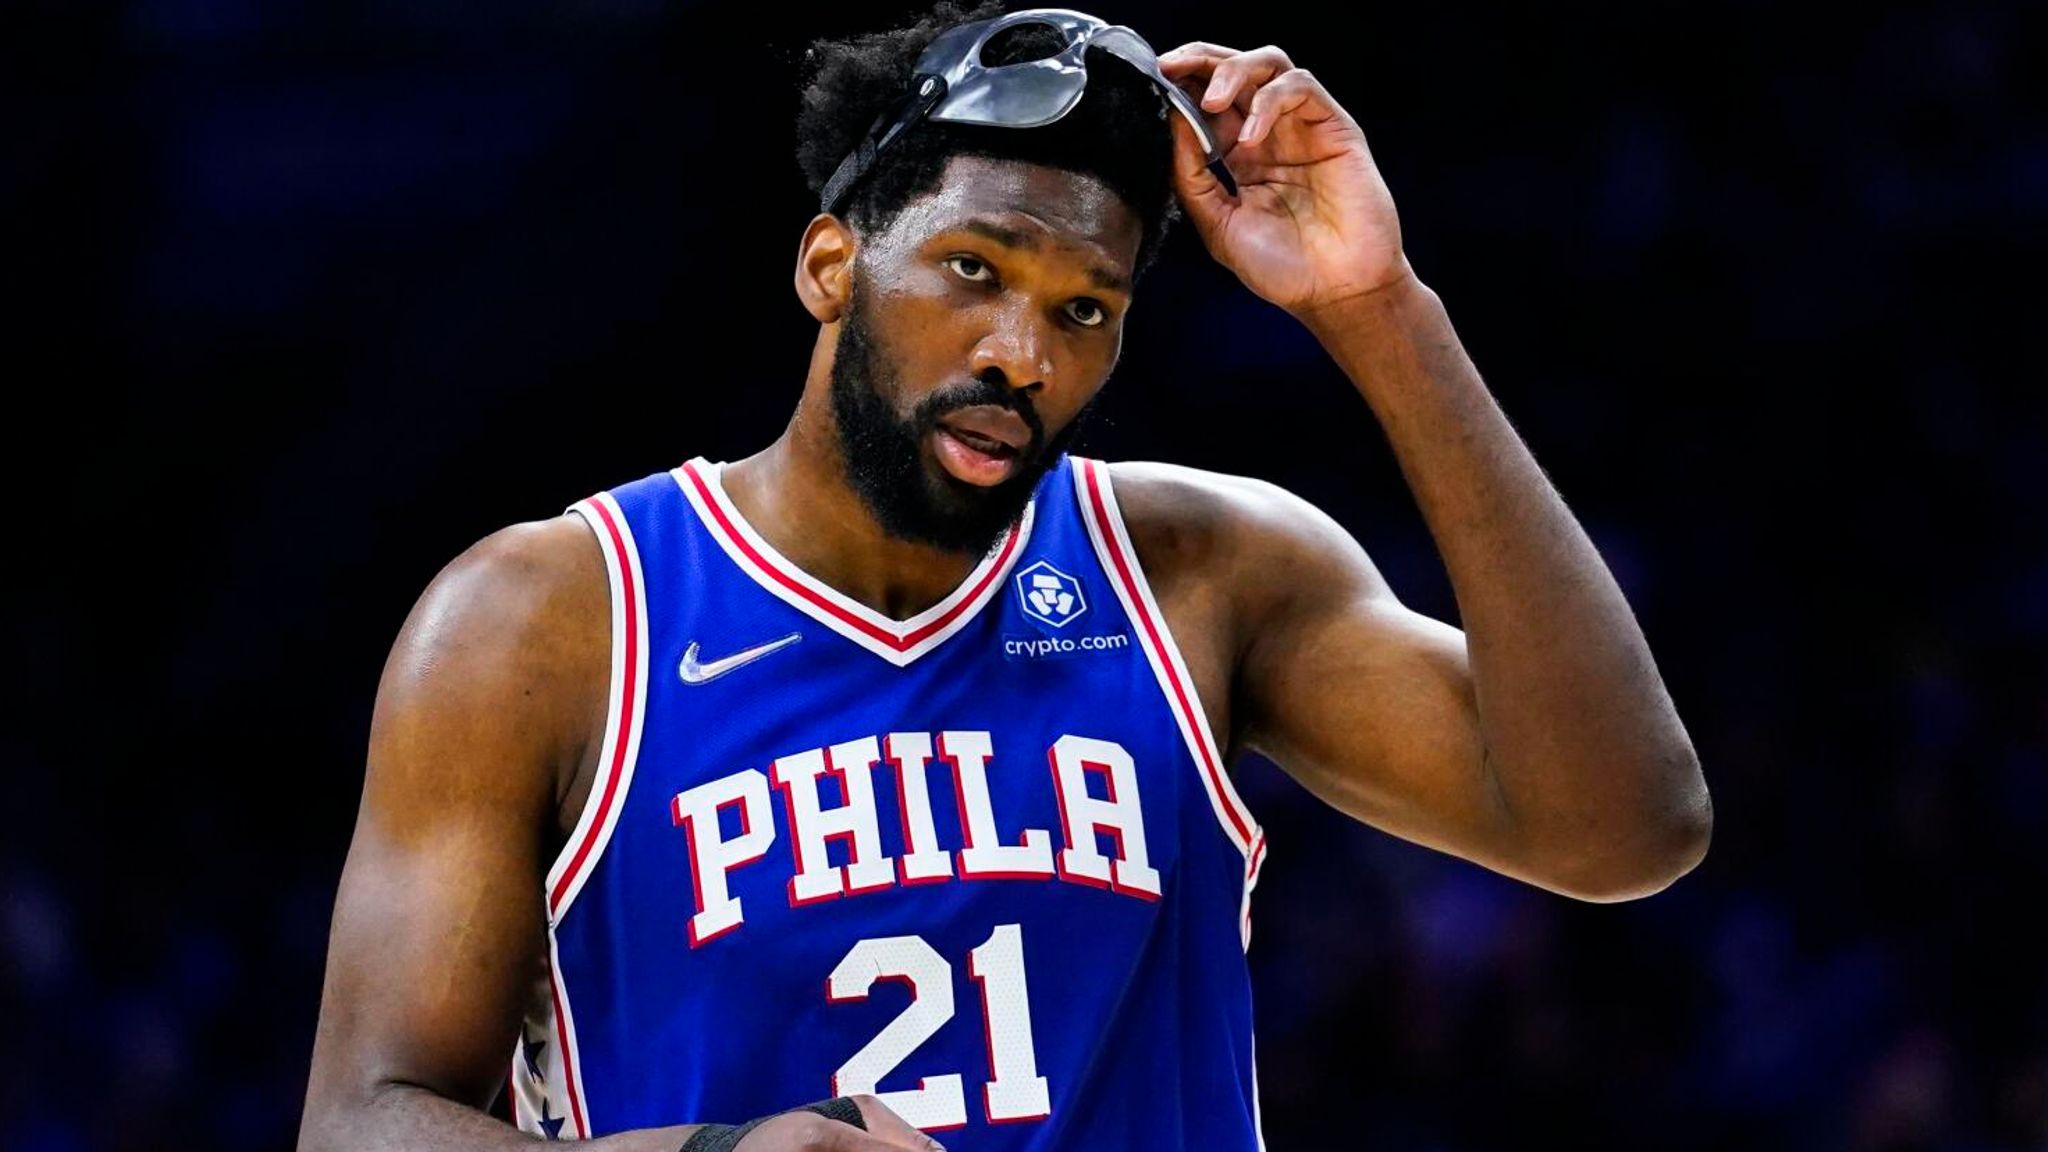 Embiid scores 23, 76ers top Heat 128-108 for 2-1 series lead - WHYY